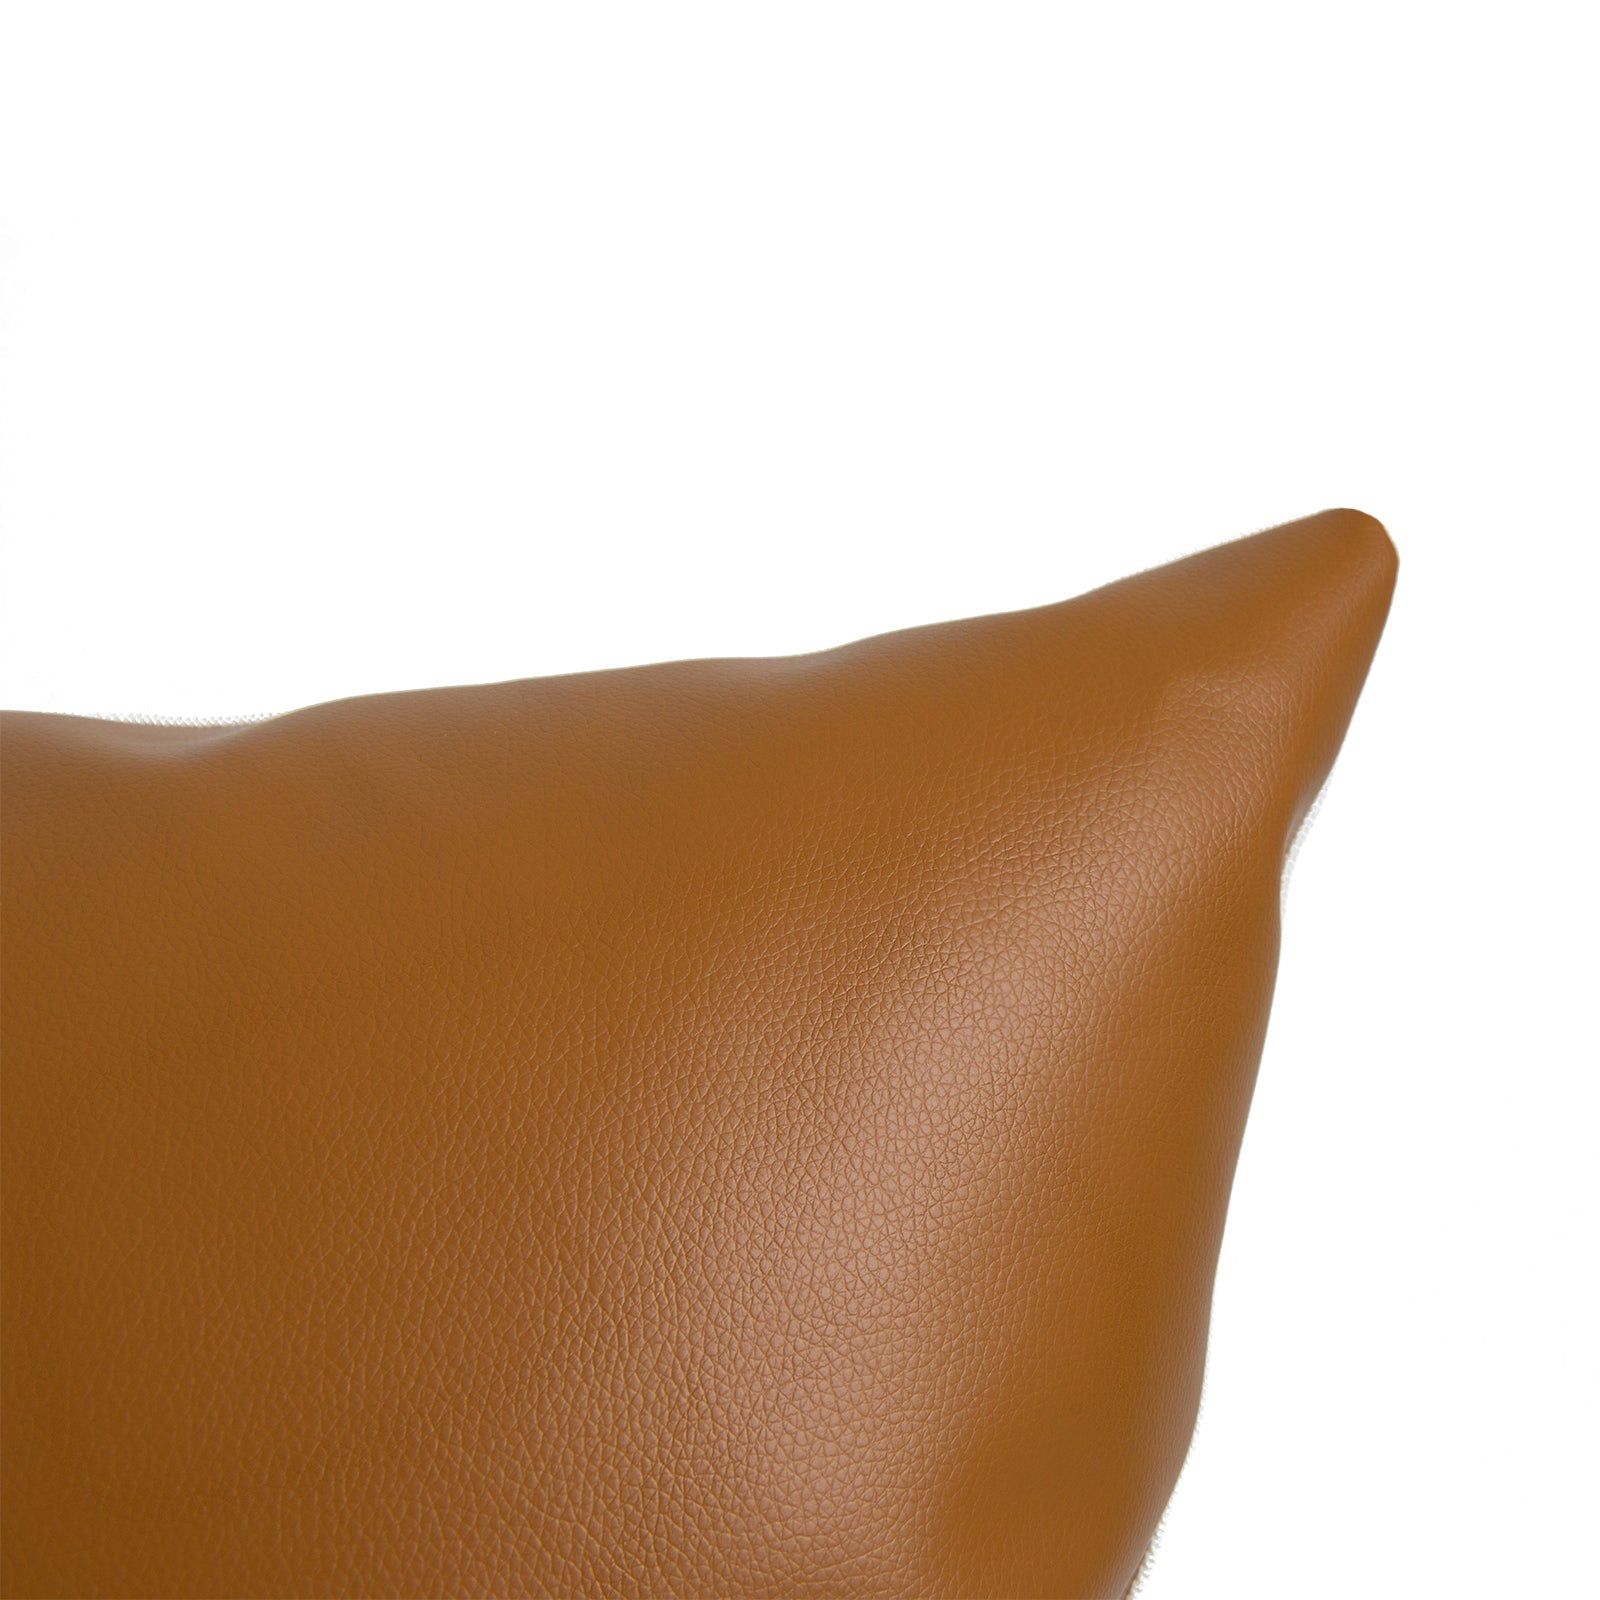 Faux Leather Lumbar Pillow Cover, Modern Design, Camel White, 12"x20"